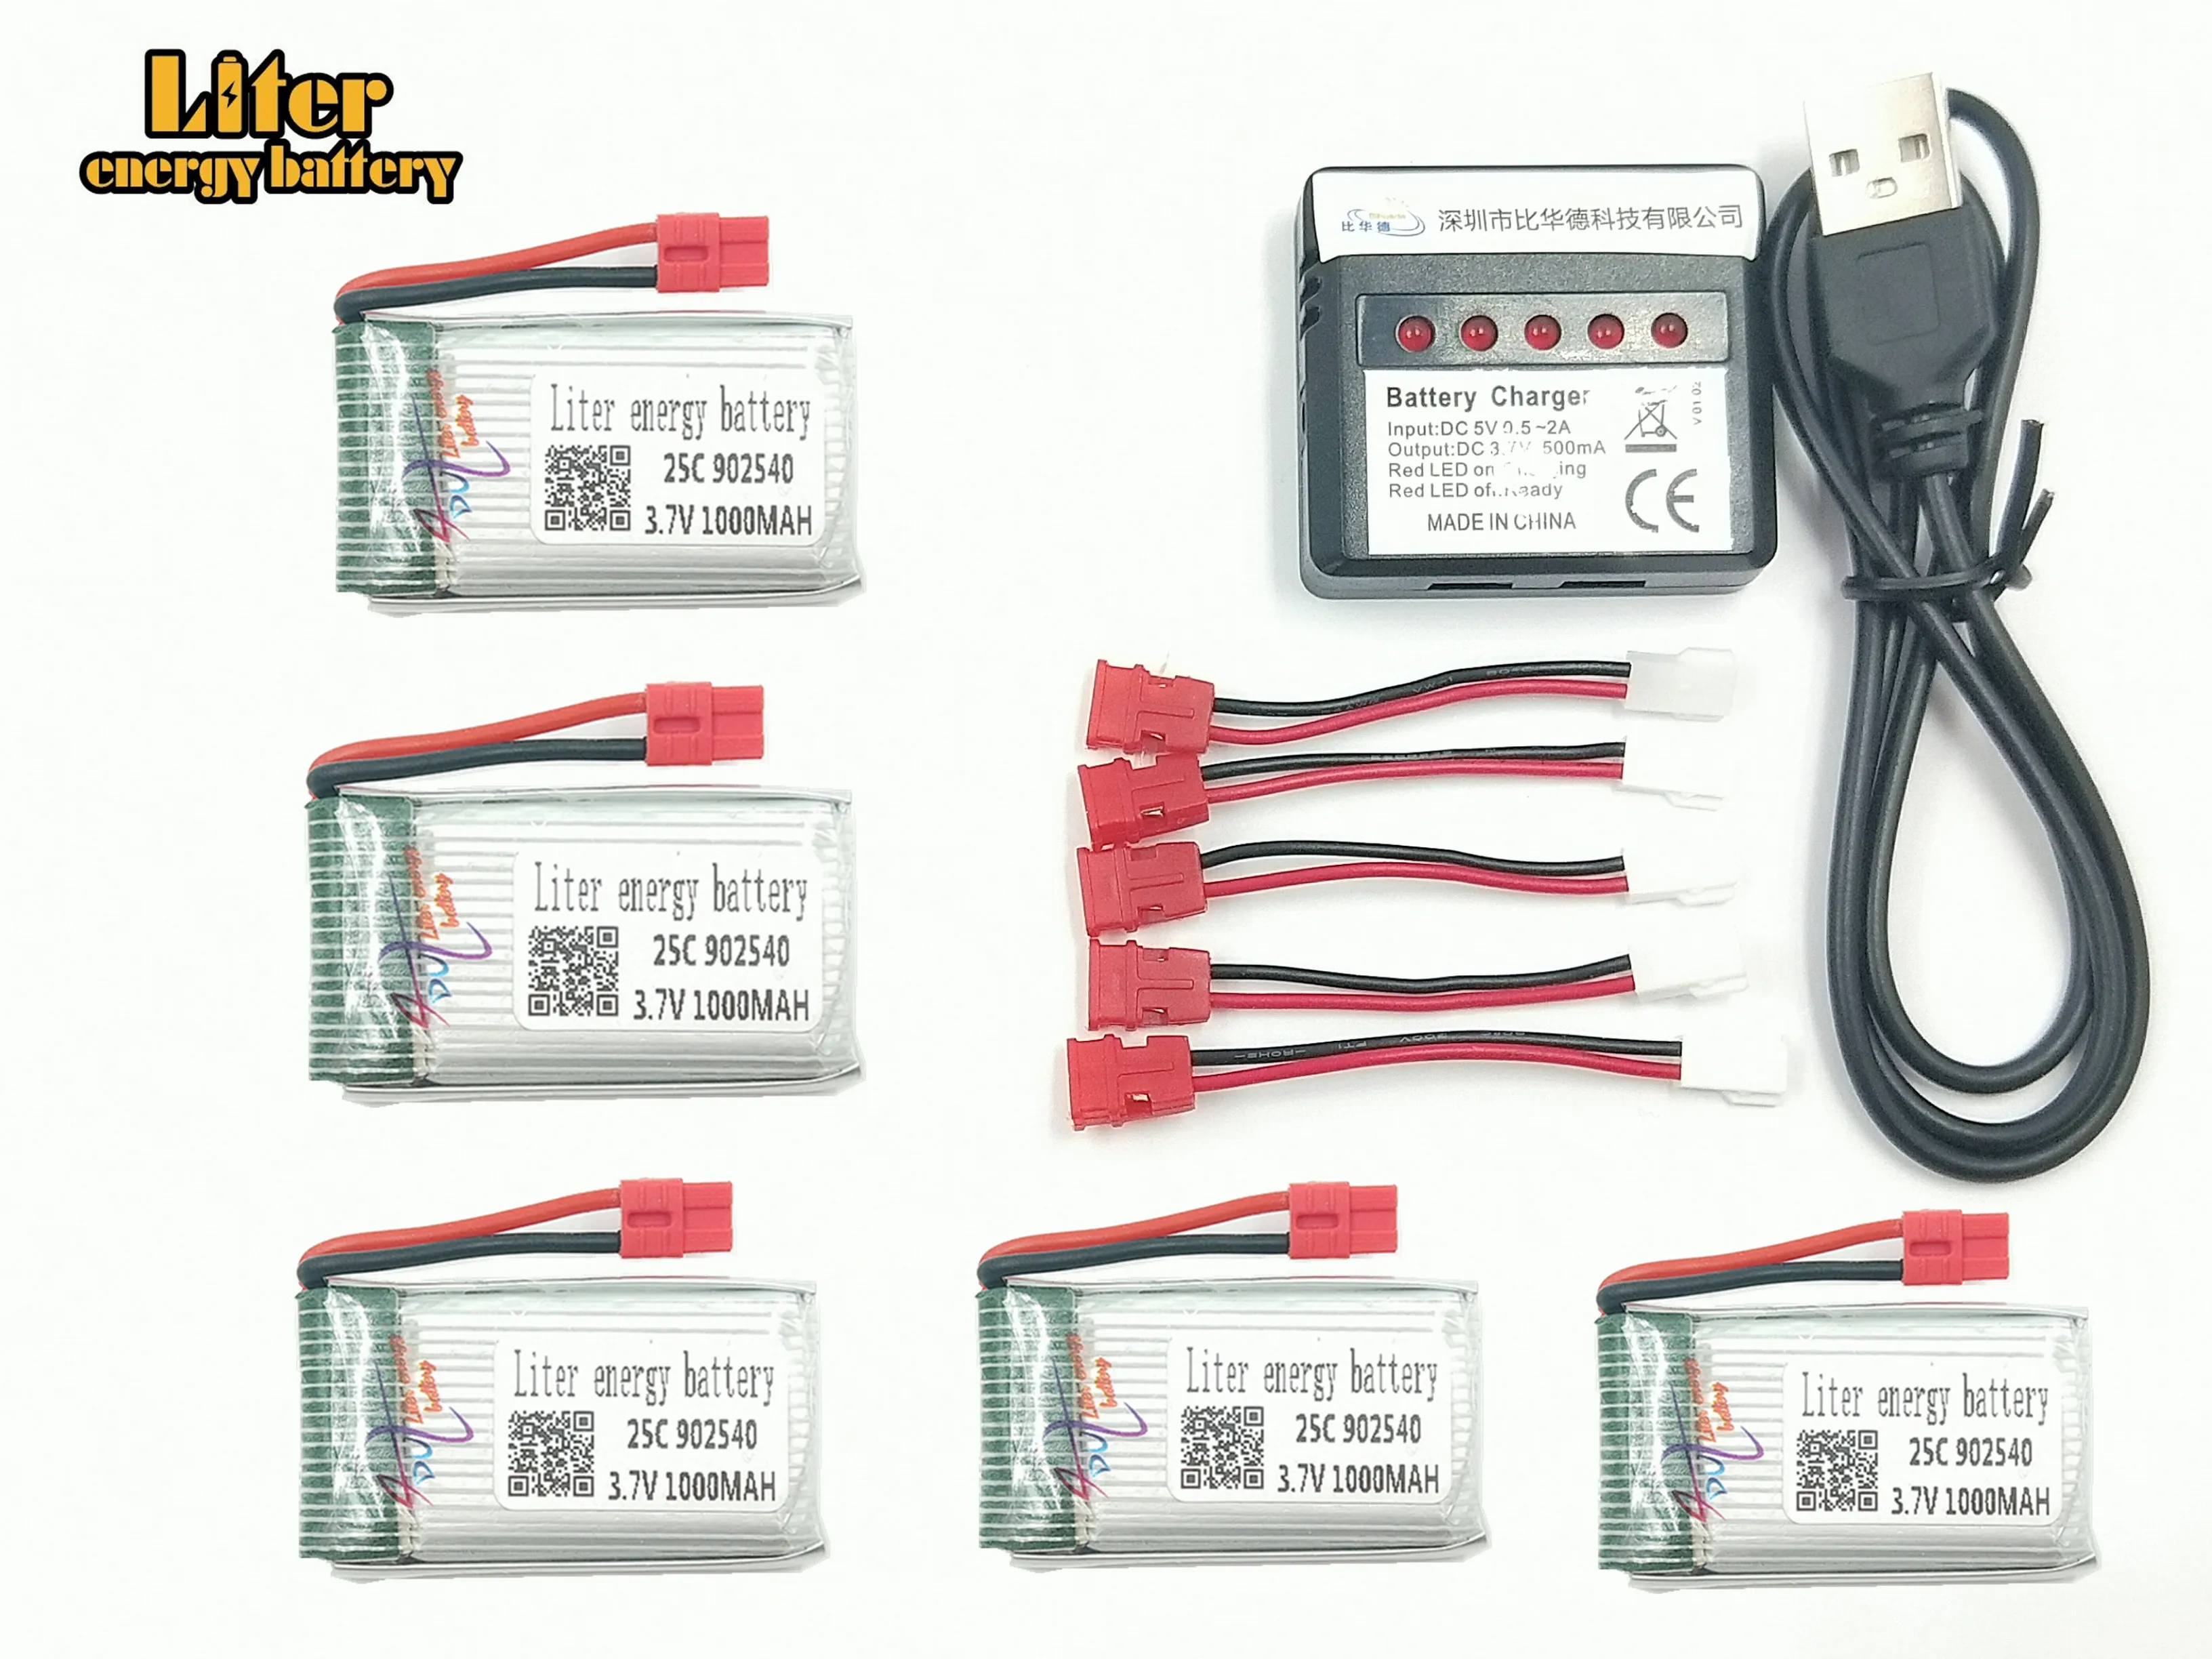 

3.7V 1000mAh 902540 LiPo Battery Integrated charger for SYMA X5hw x5hc RC Drone Quadcopter + AC 5in1 Charger Spare Parts Set